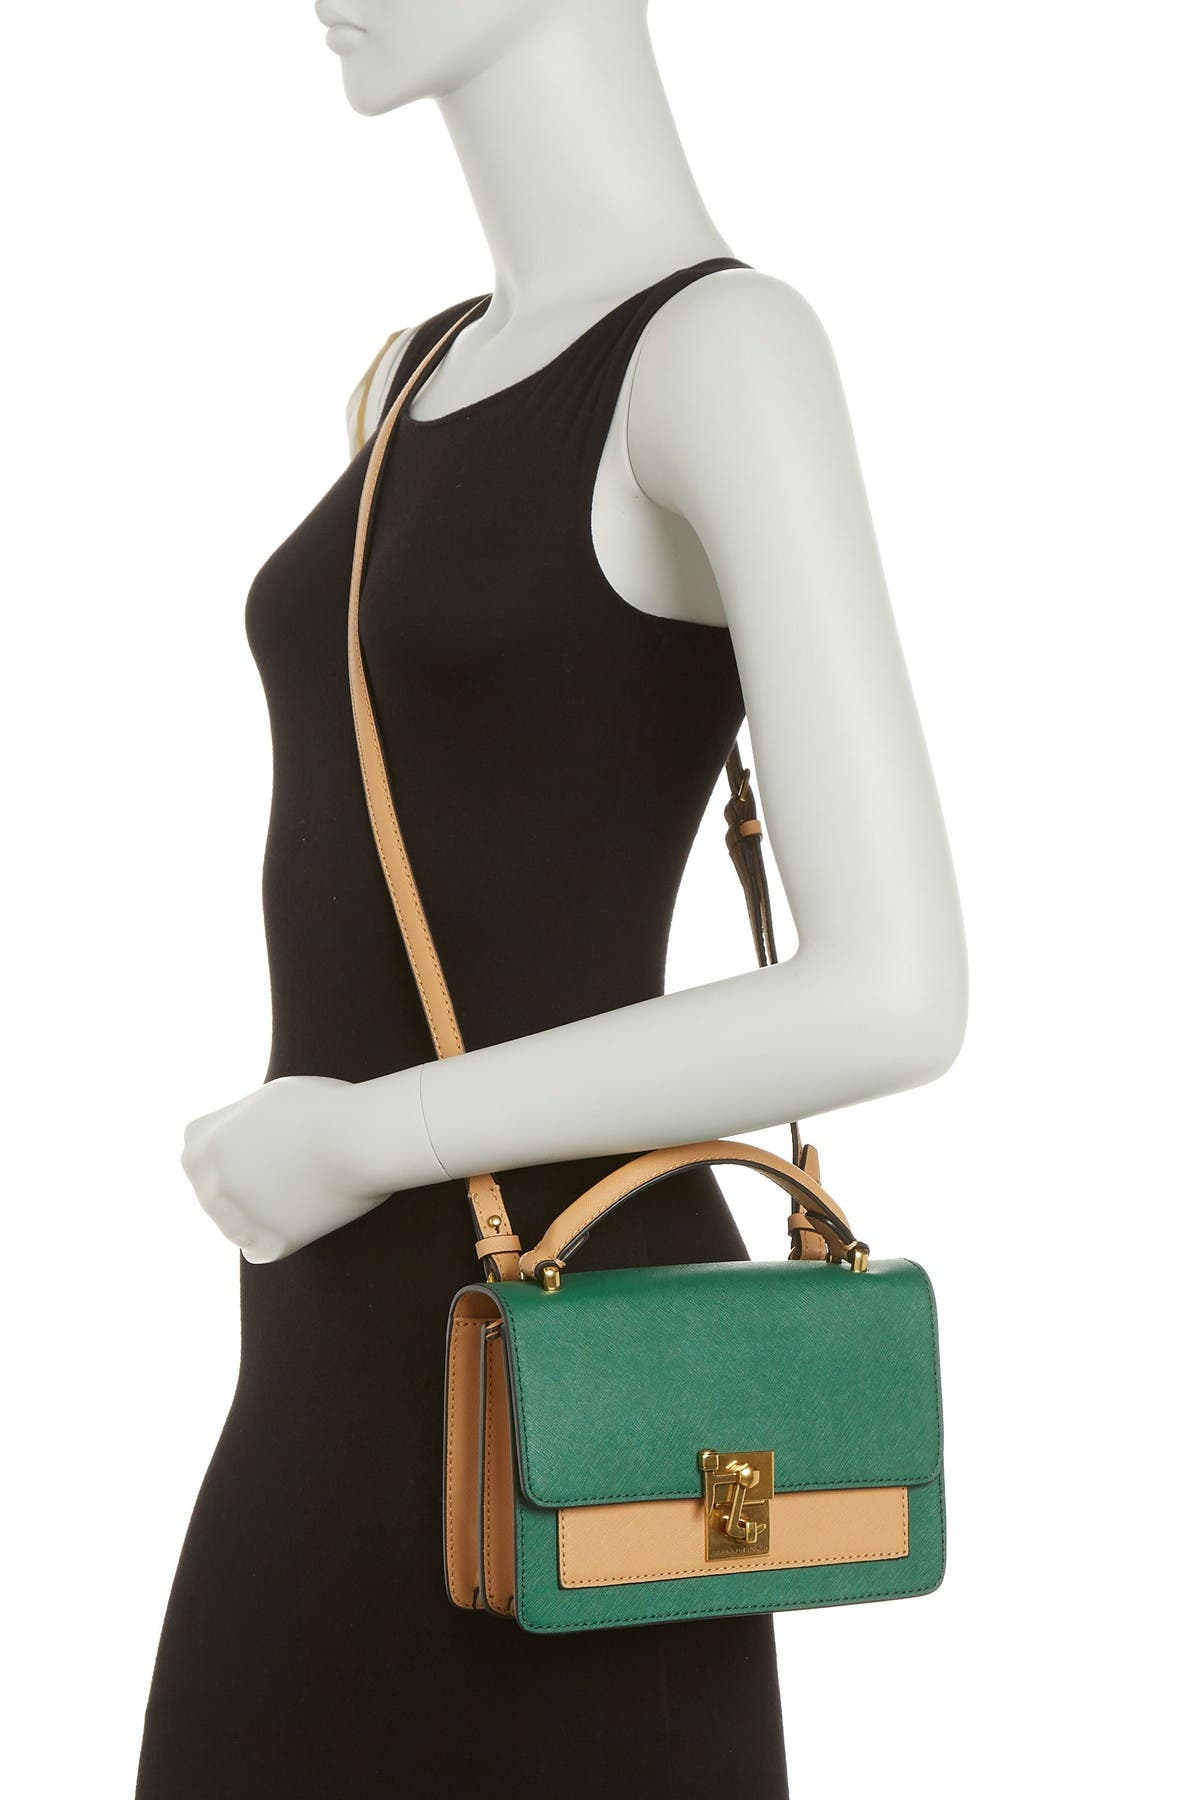 Etienne Aigner Leah Leather Crossbody In Verdant Green/biscui